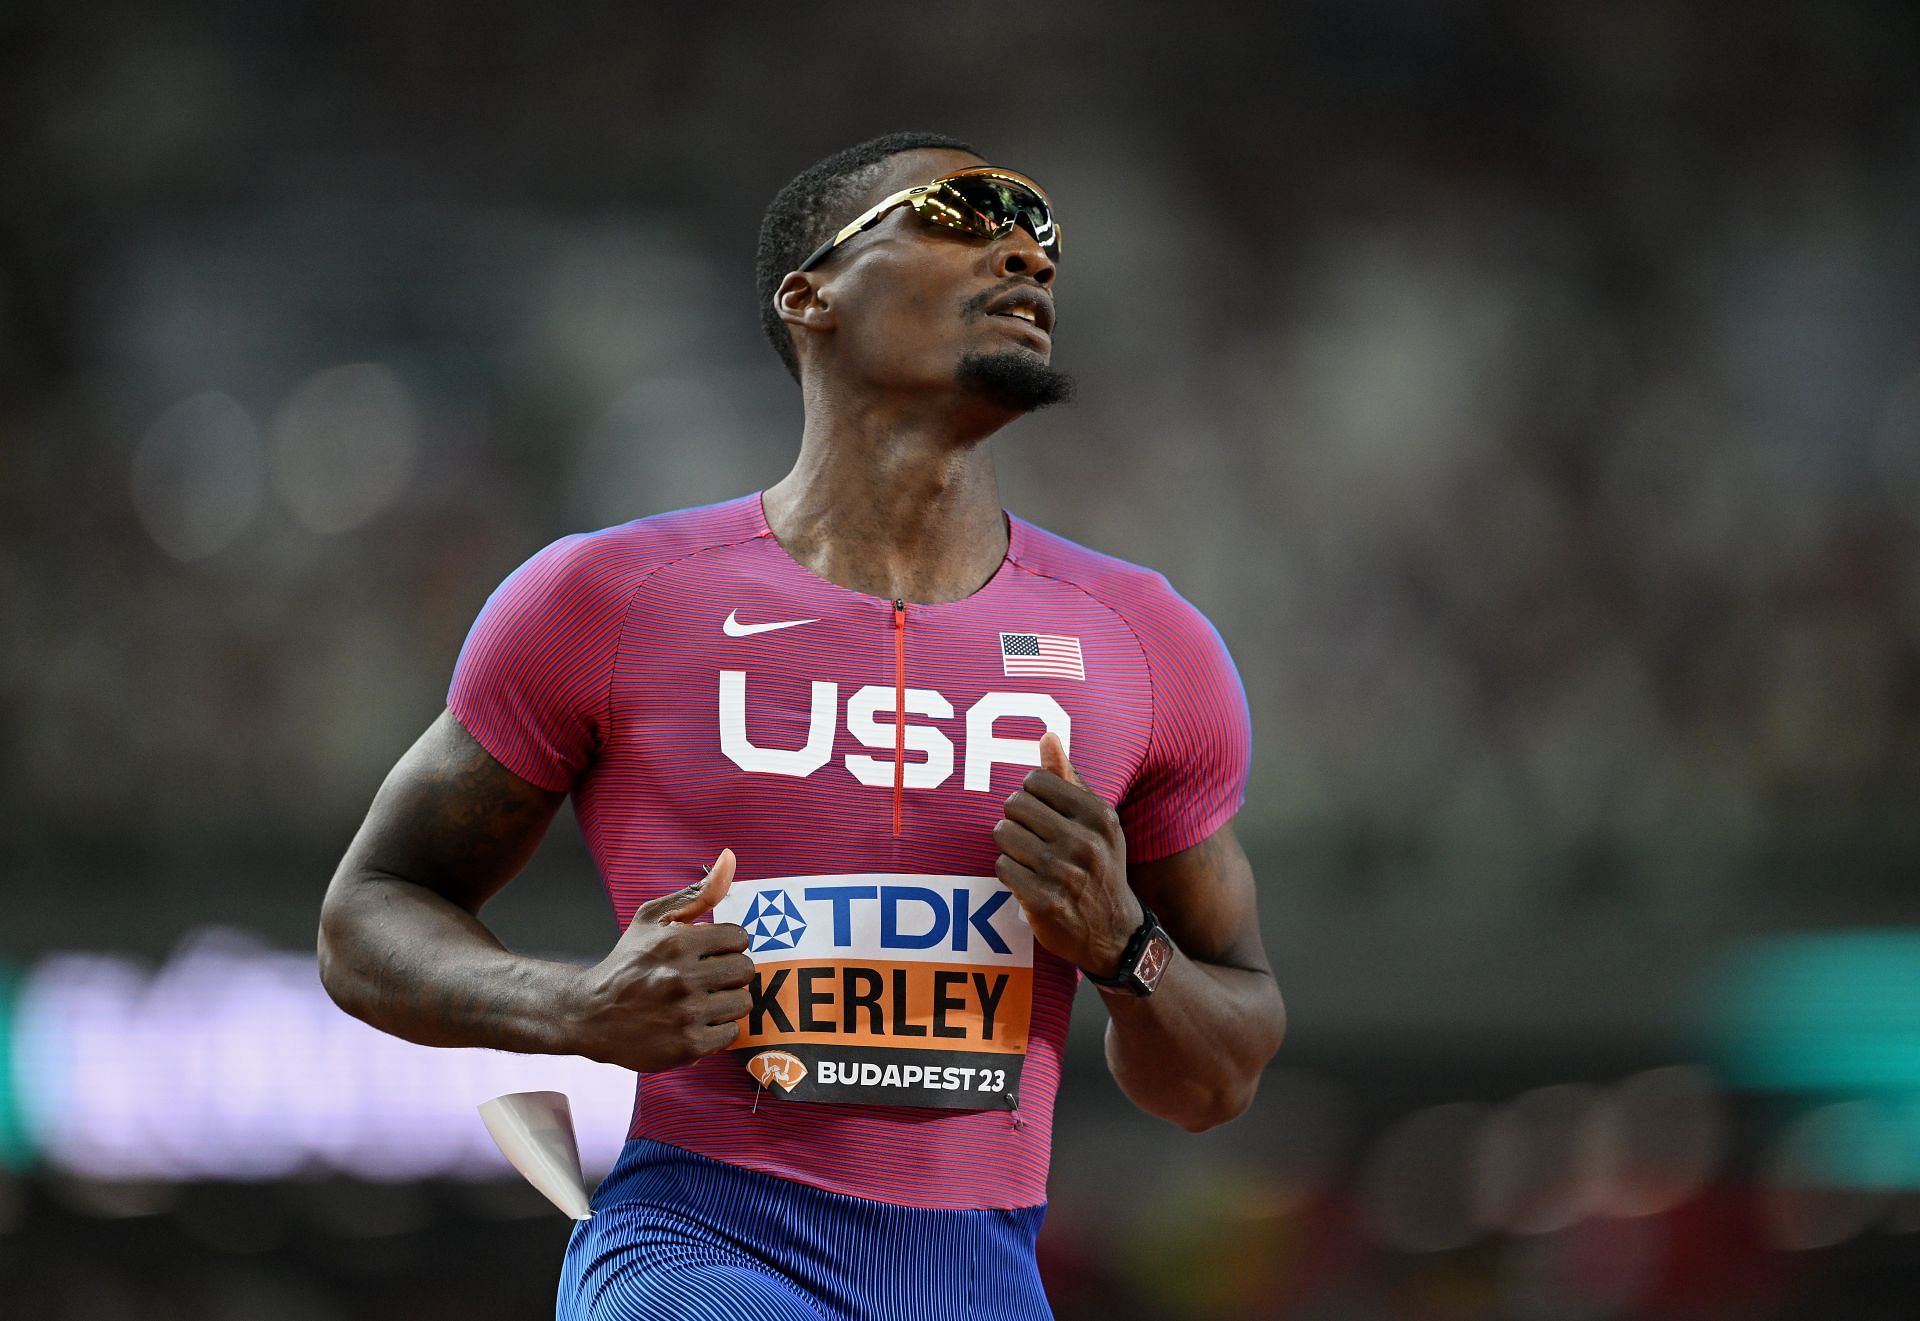 Fred Keryel in action at the World Athletics Championships in Budapest in 2023